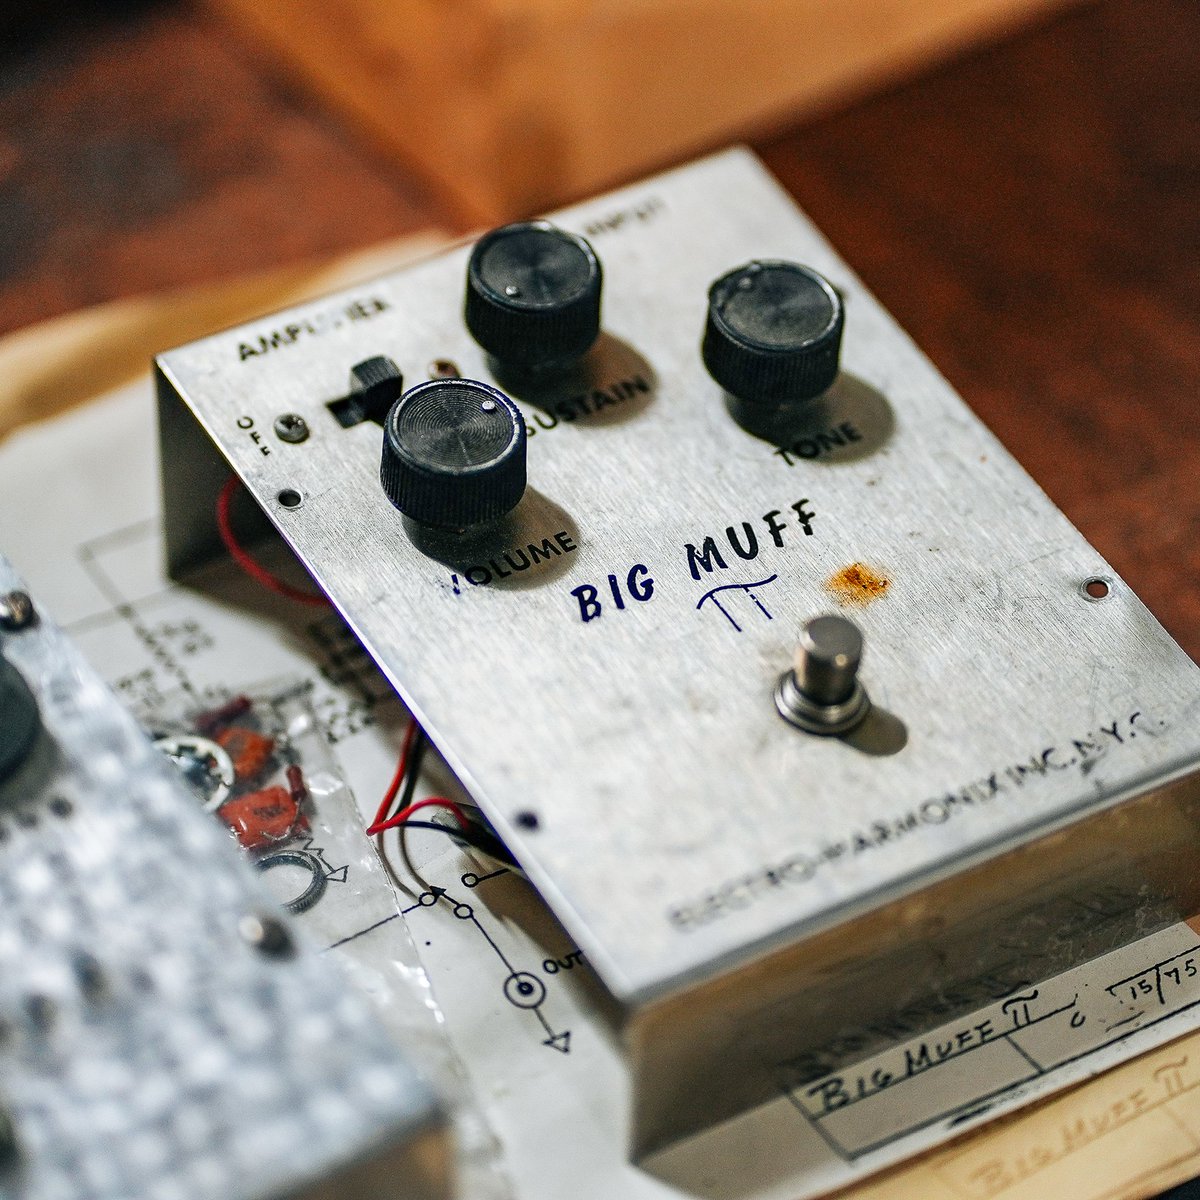 The OG BMP, the V1 'Triangle' Big Muff Pi is a Muff of now legendary status with its violin-like sustain and smooth harmonic distortion!
Check out EHX's modern reissue ehx.com/trianglebigmuf…

#ehx #guitarpedals #guitargear #guitareffects #electroharmonix #bigmuff